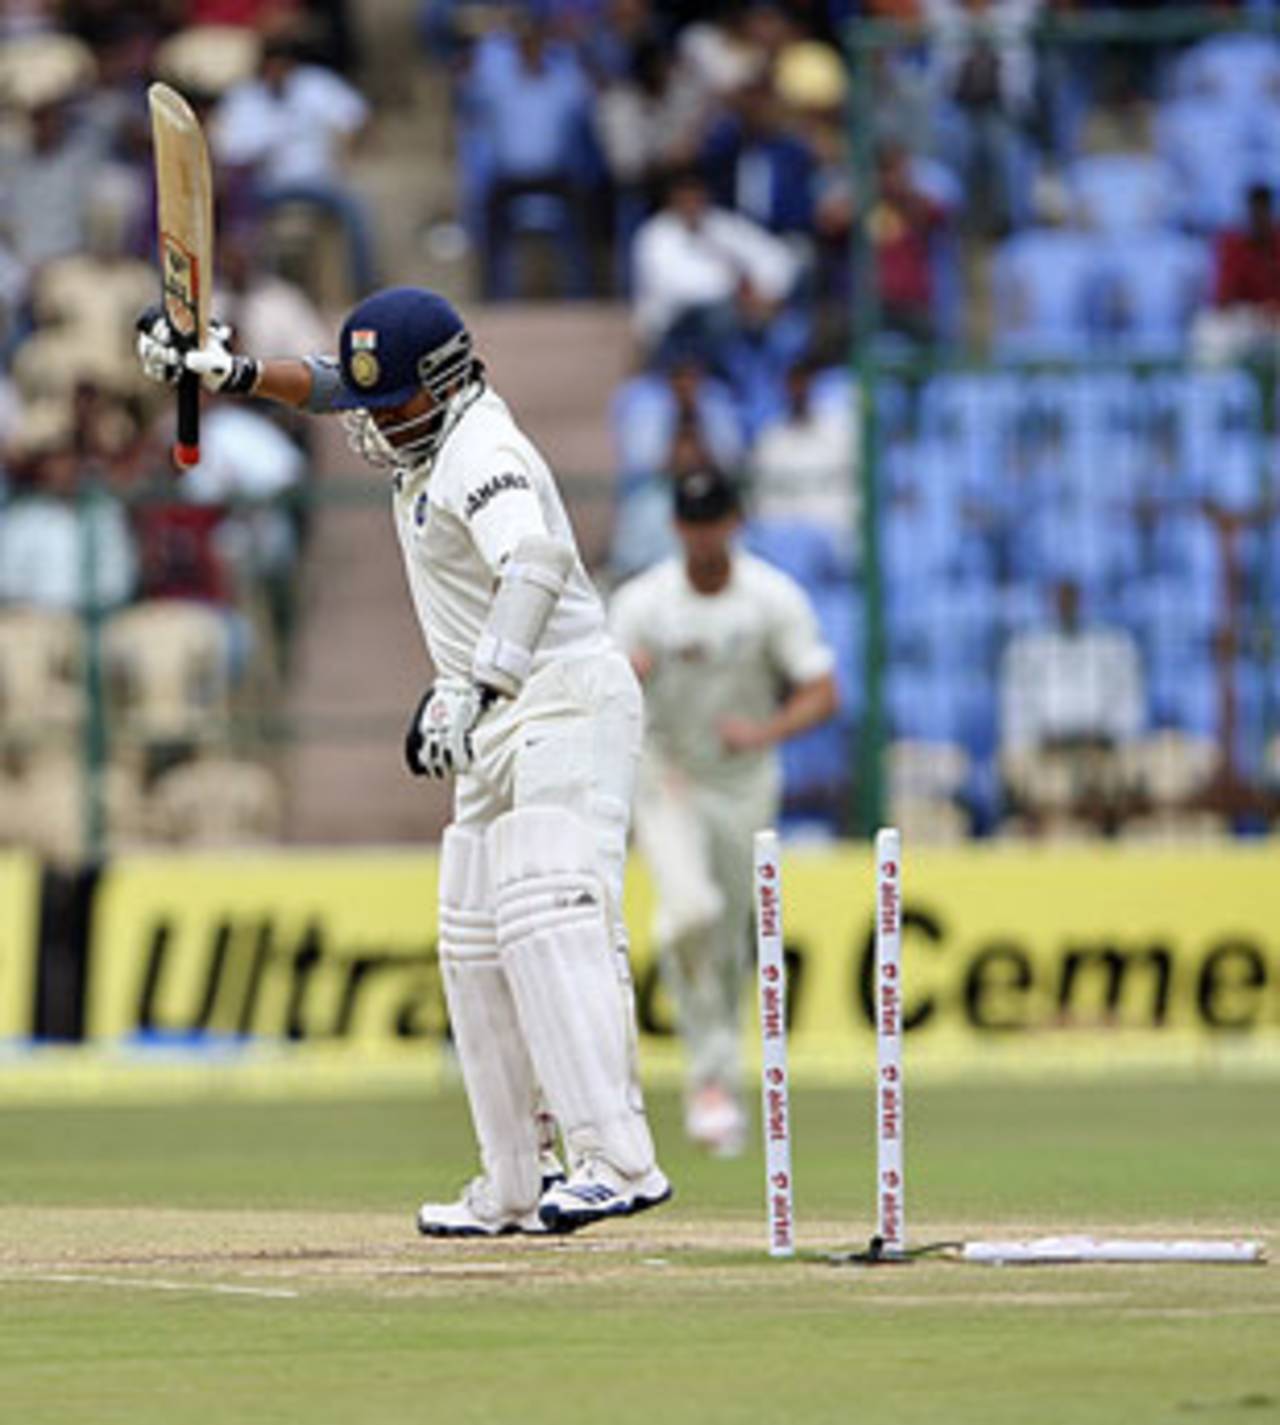 In Bangalore, we may well have seen for the first time Sachin Tendulkar's nerve show signs of twitching&nbsp;&nbsp;&bull;&nbsp;&nbsp;Associated Press